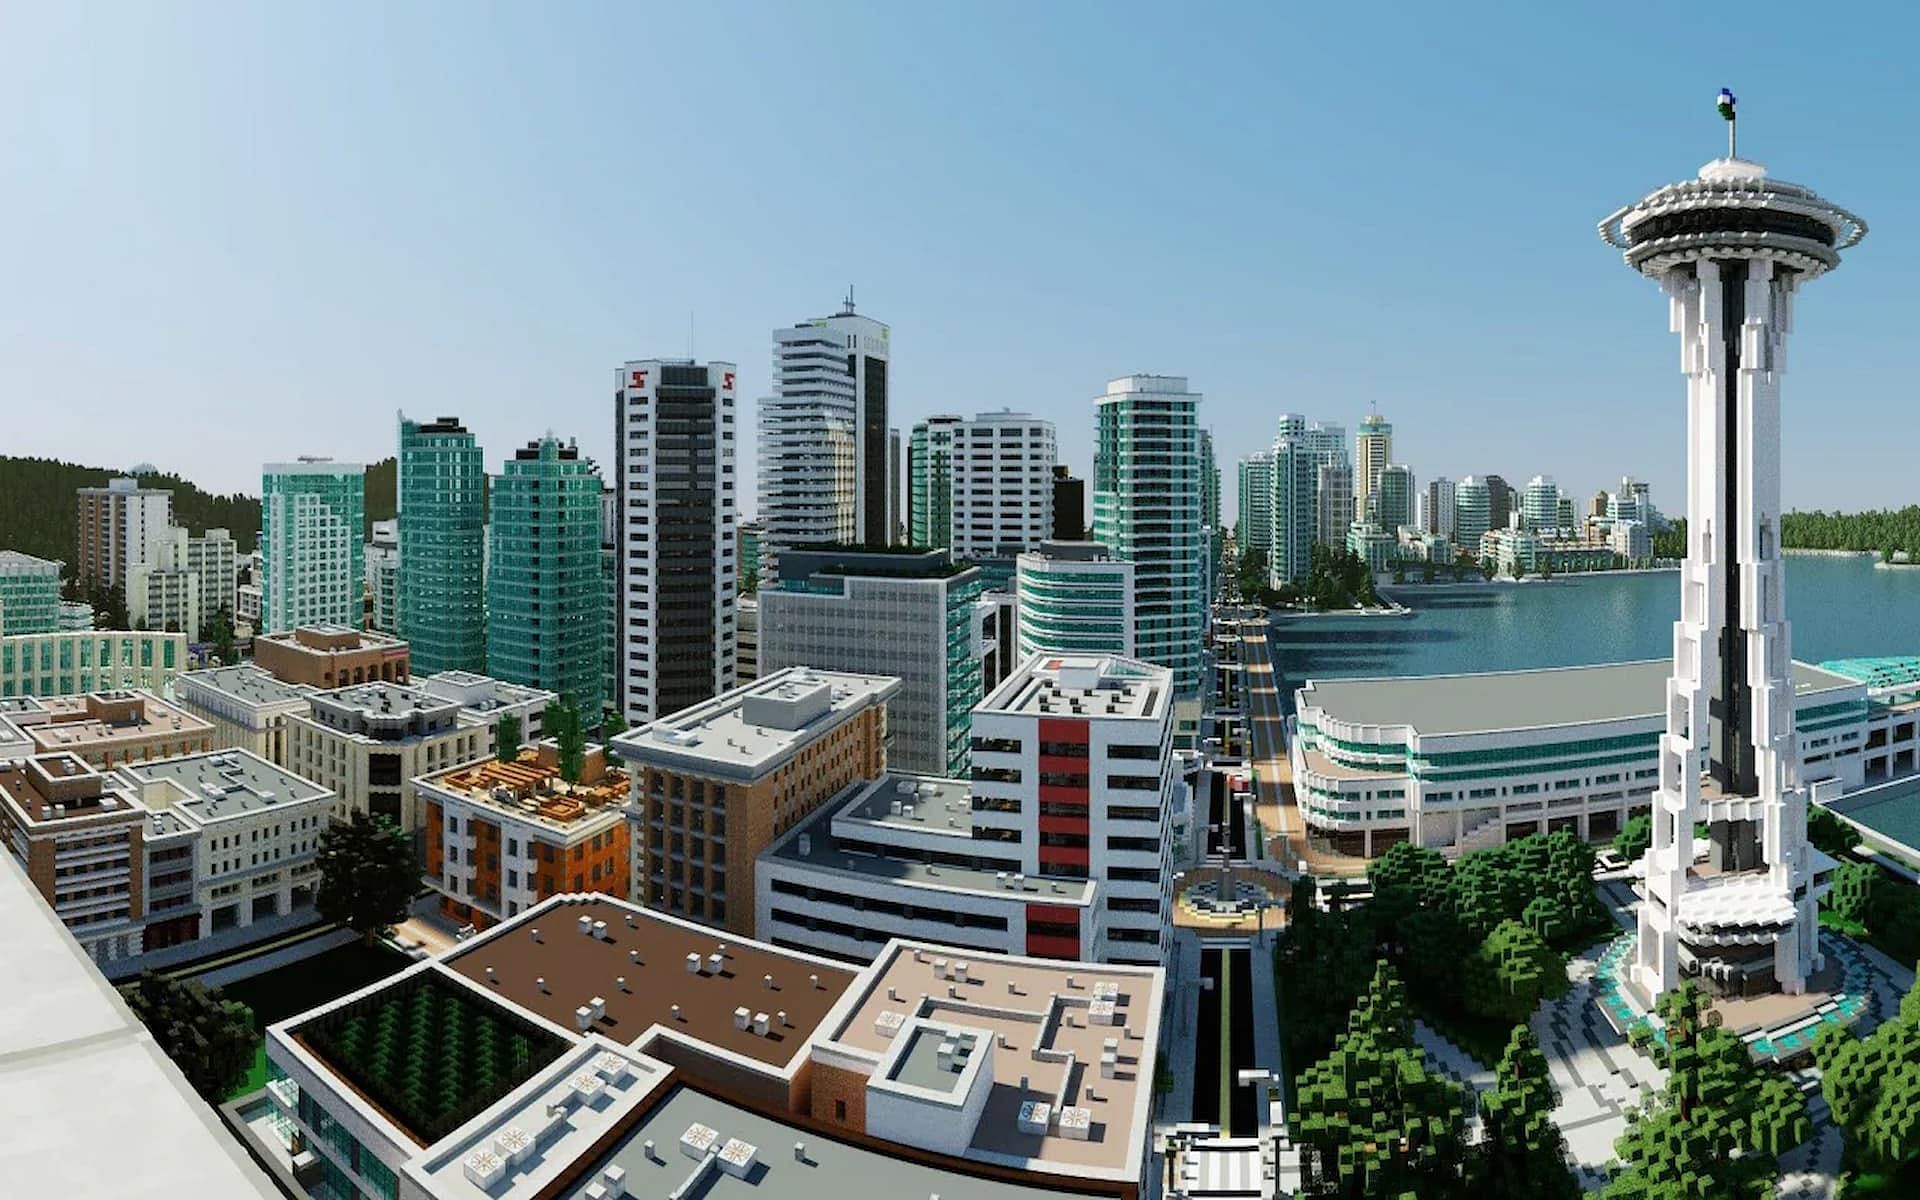 Players can make lots of very interesting cities and towns in Minecraft (Image via Minecraft.net)